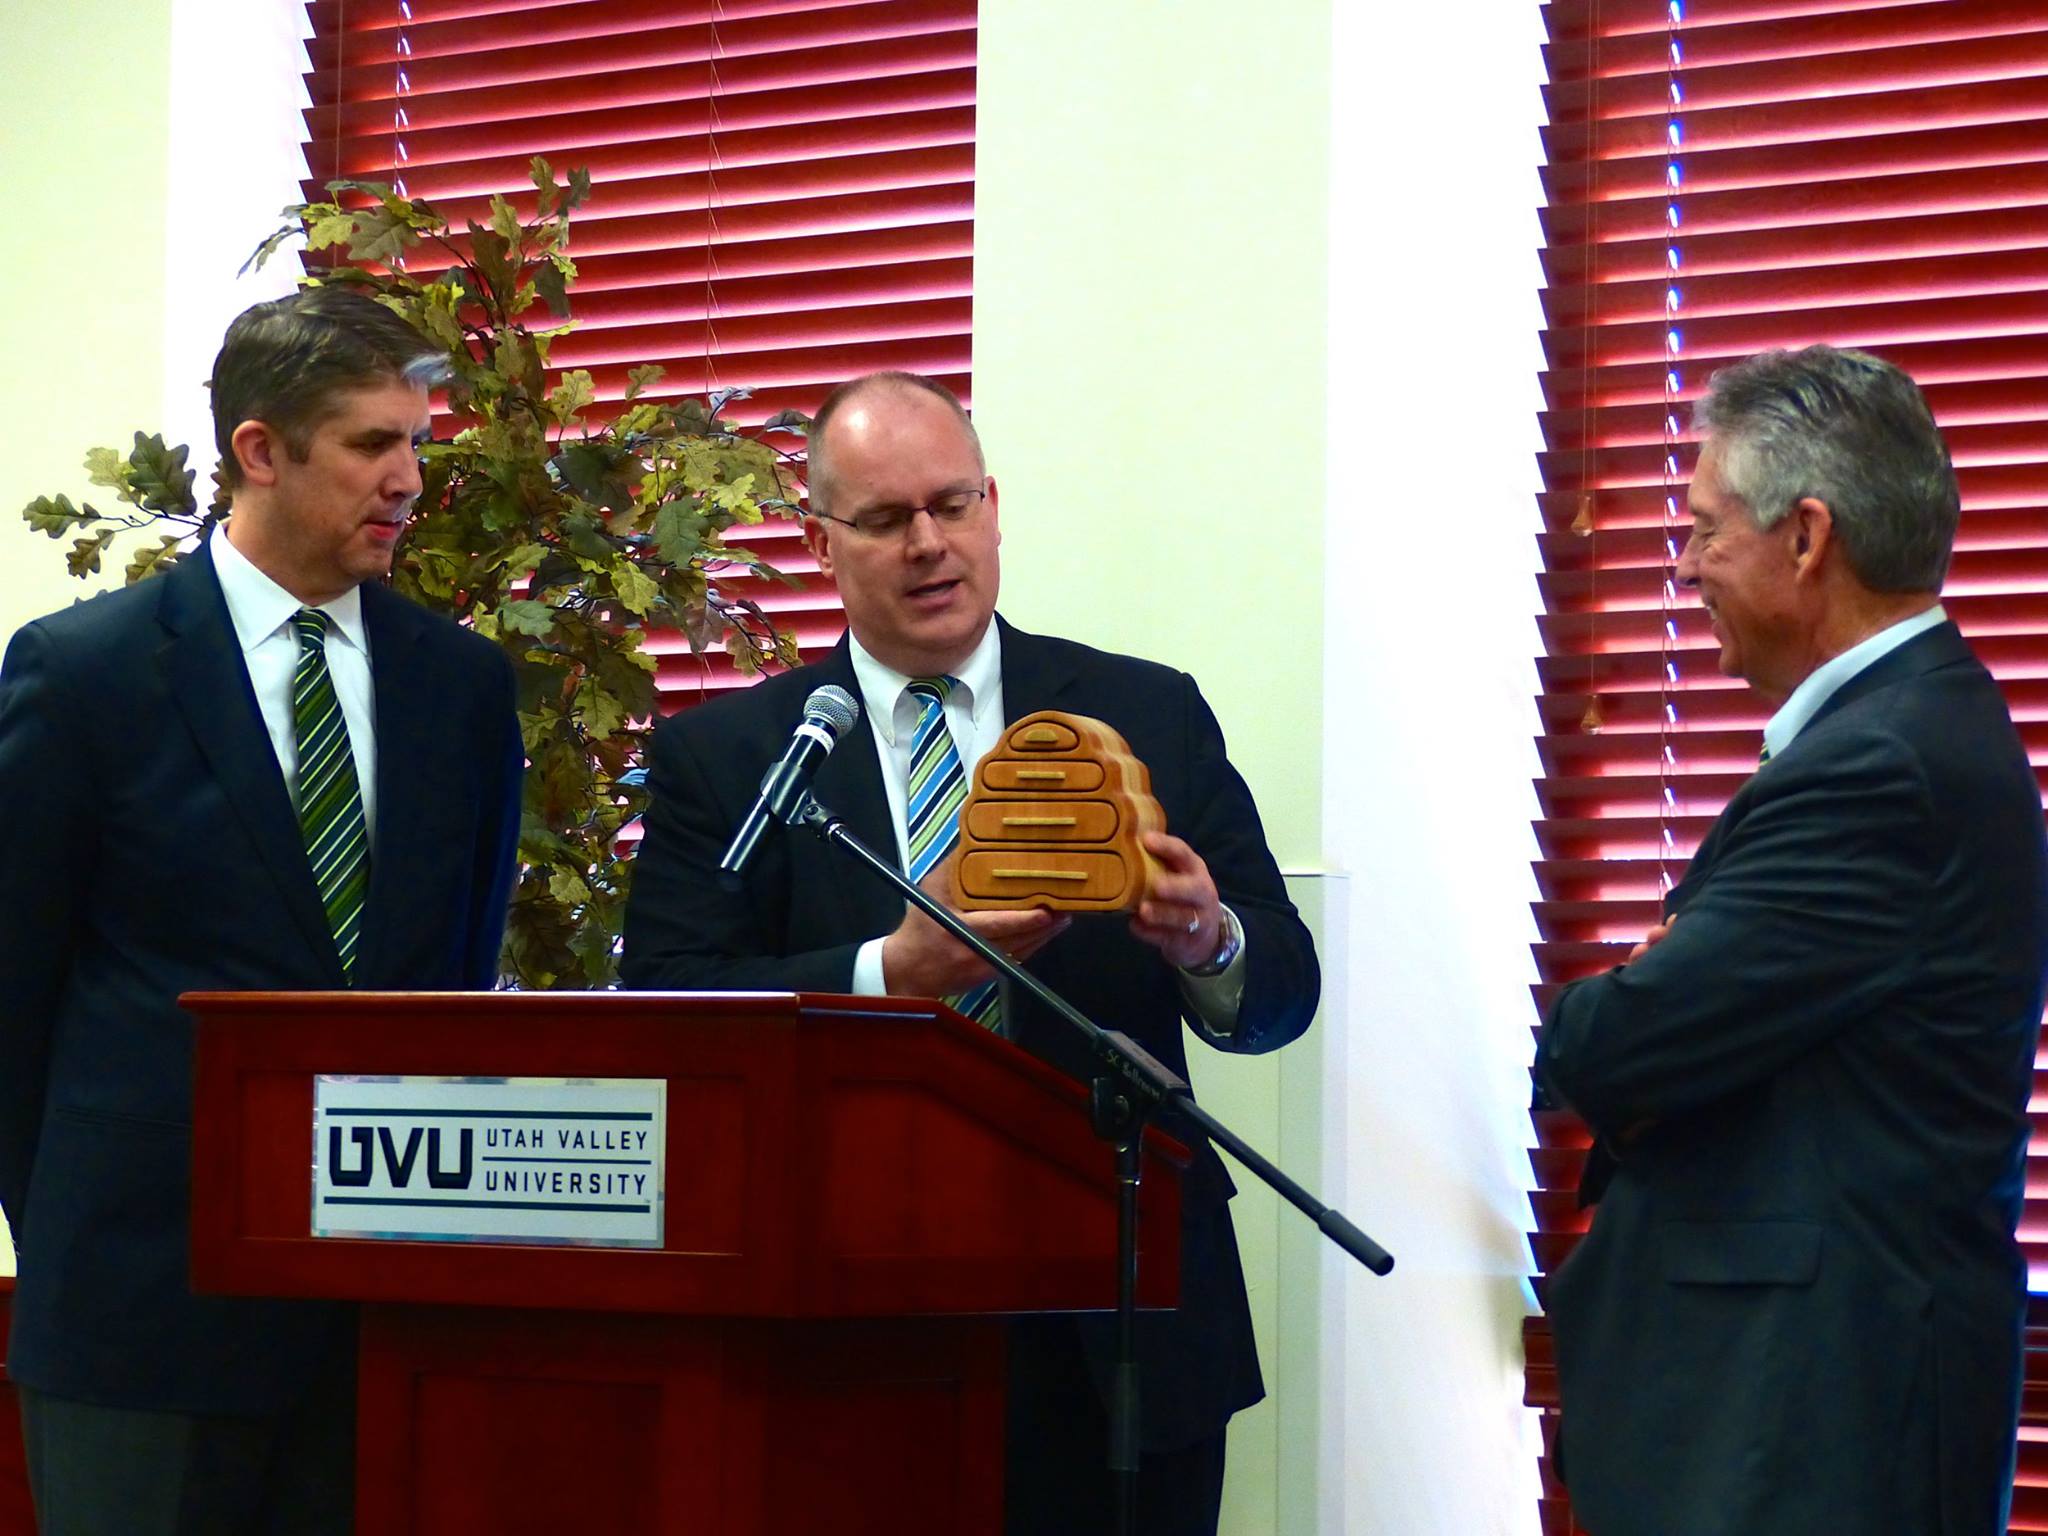 President Holland and VP Cameron Martin recognize Rusty on his retirement from UVU.